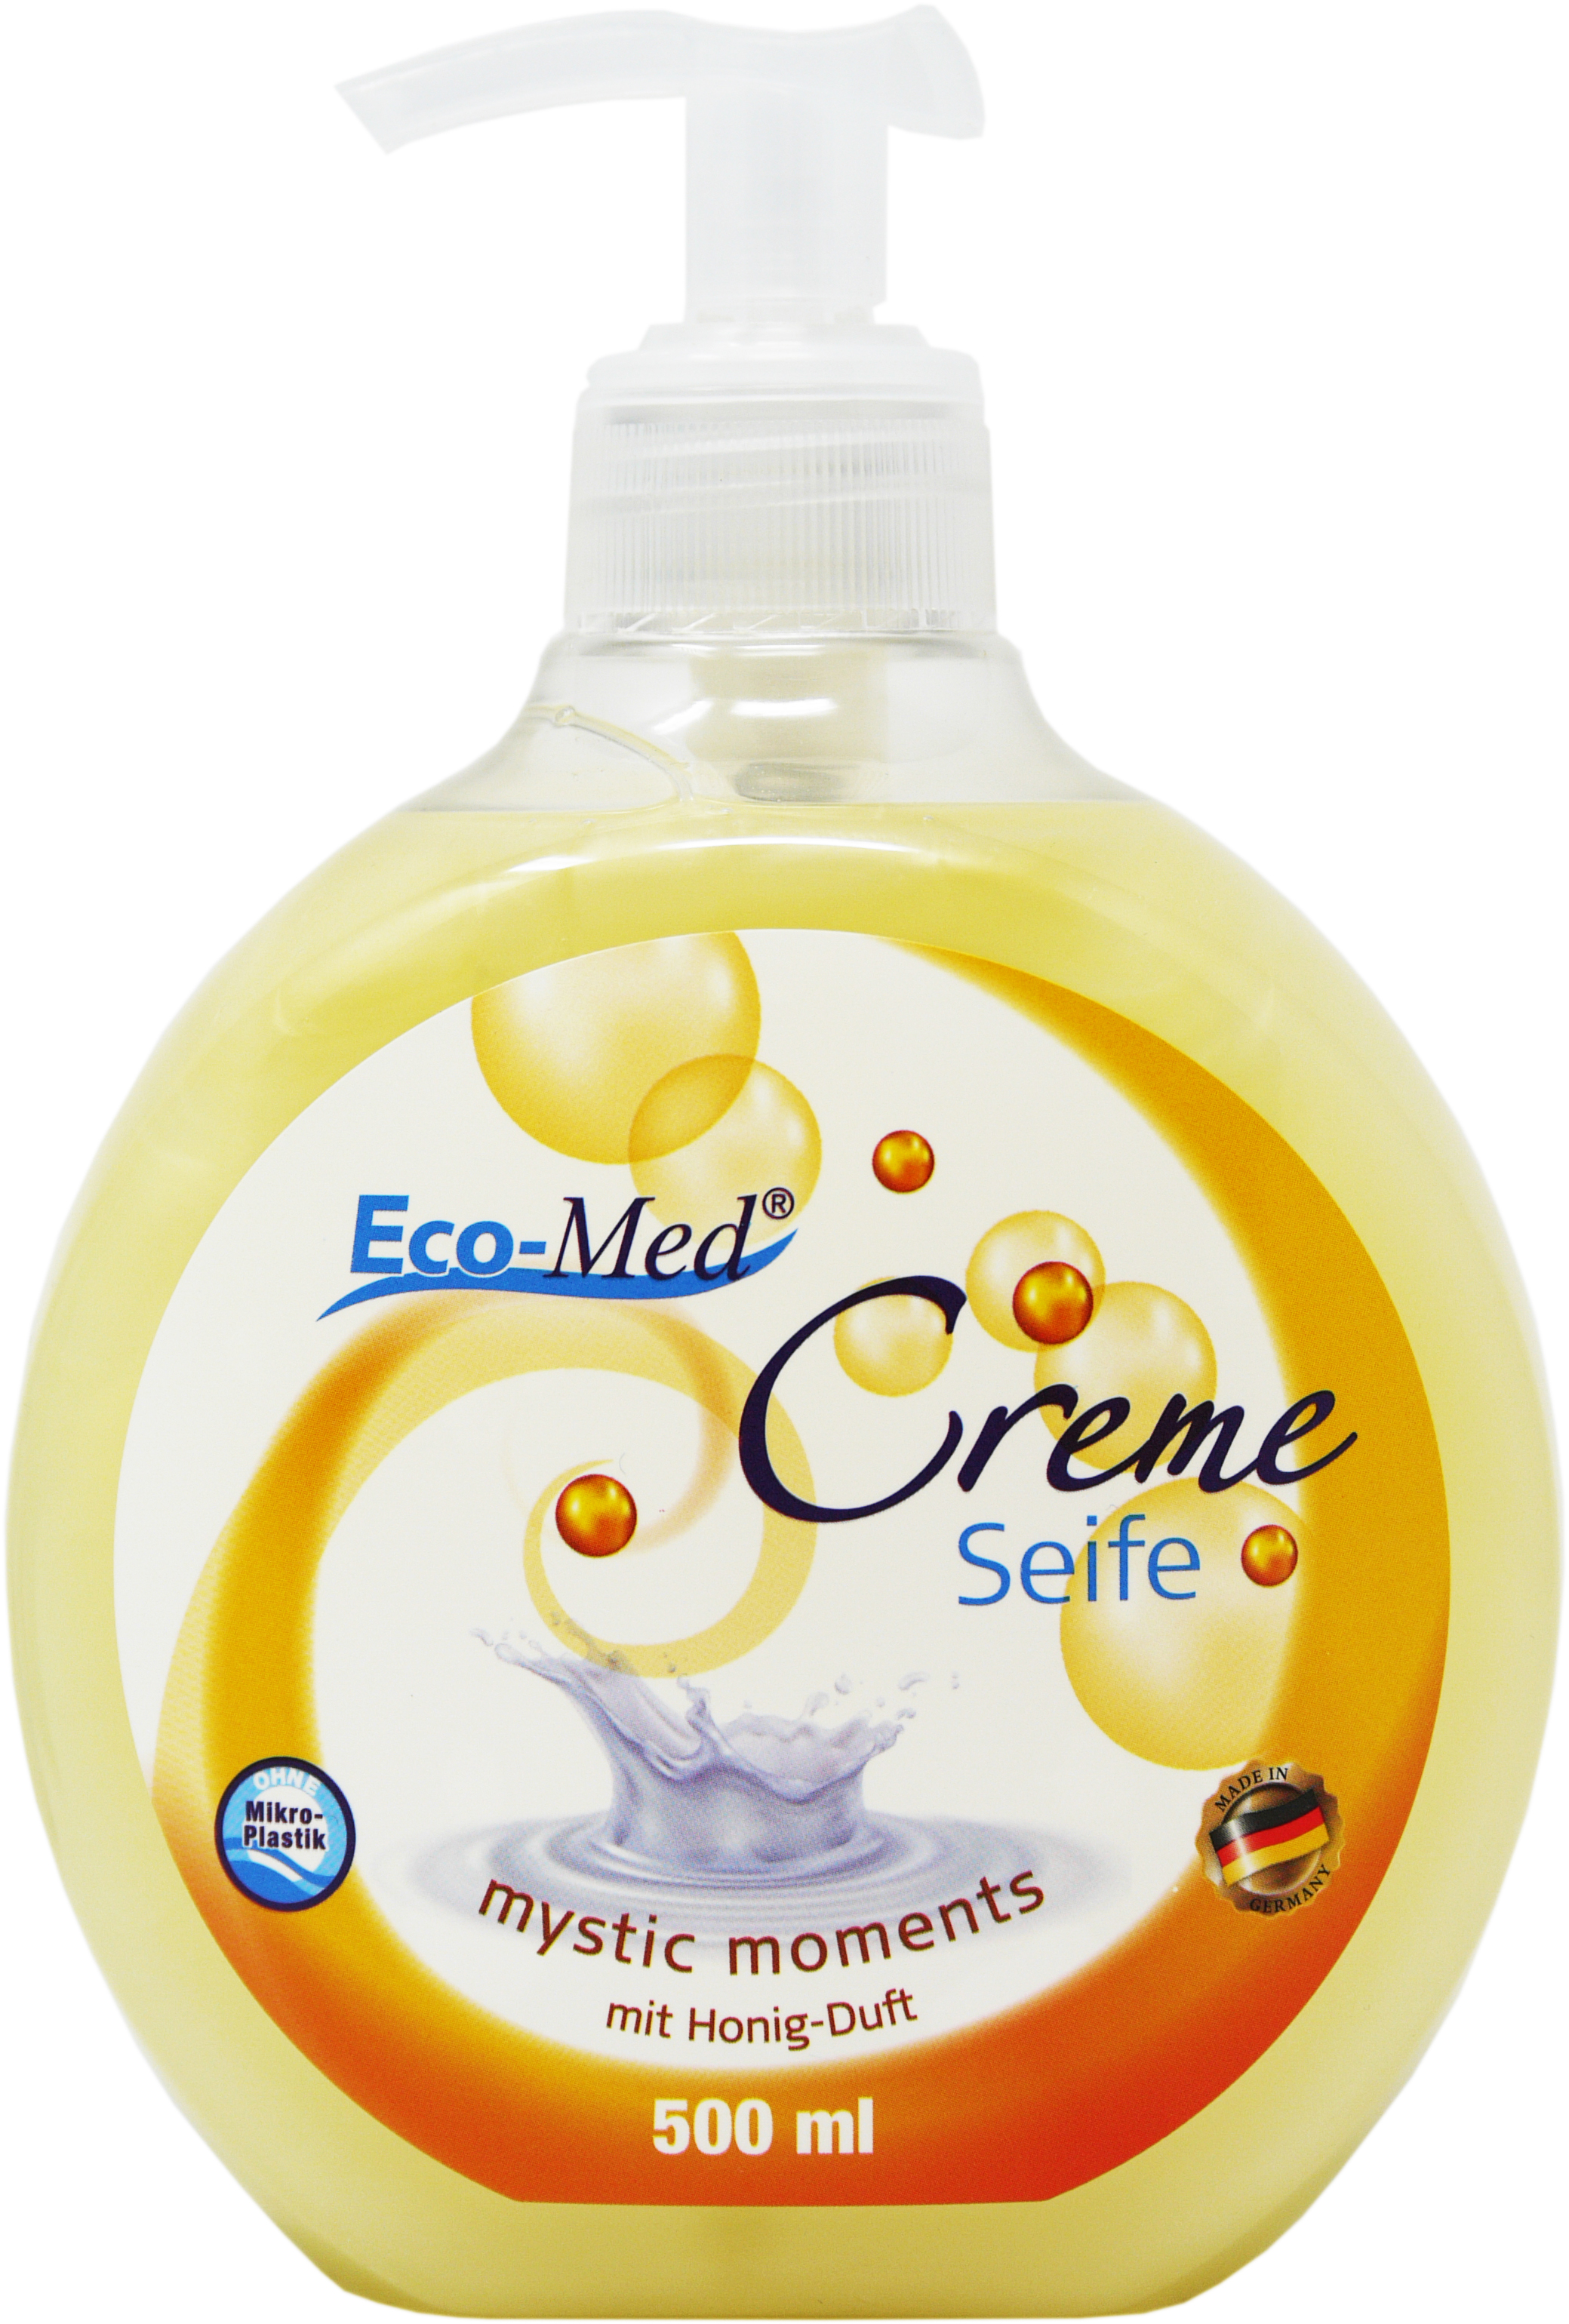 01621 - creamsoap 500 ml - mystic moments - with honey fragrence